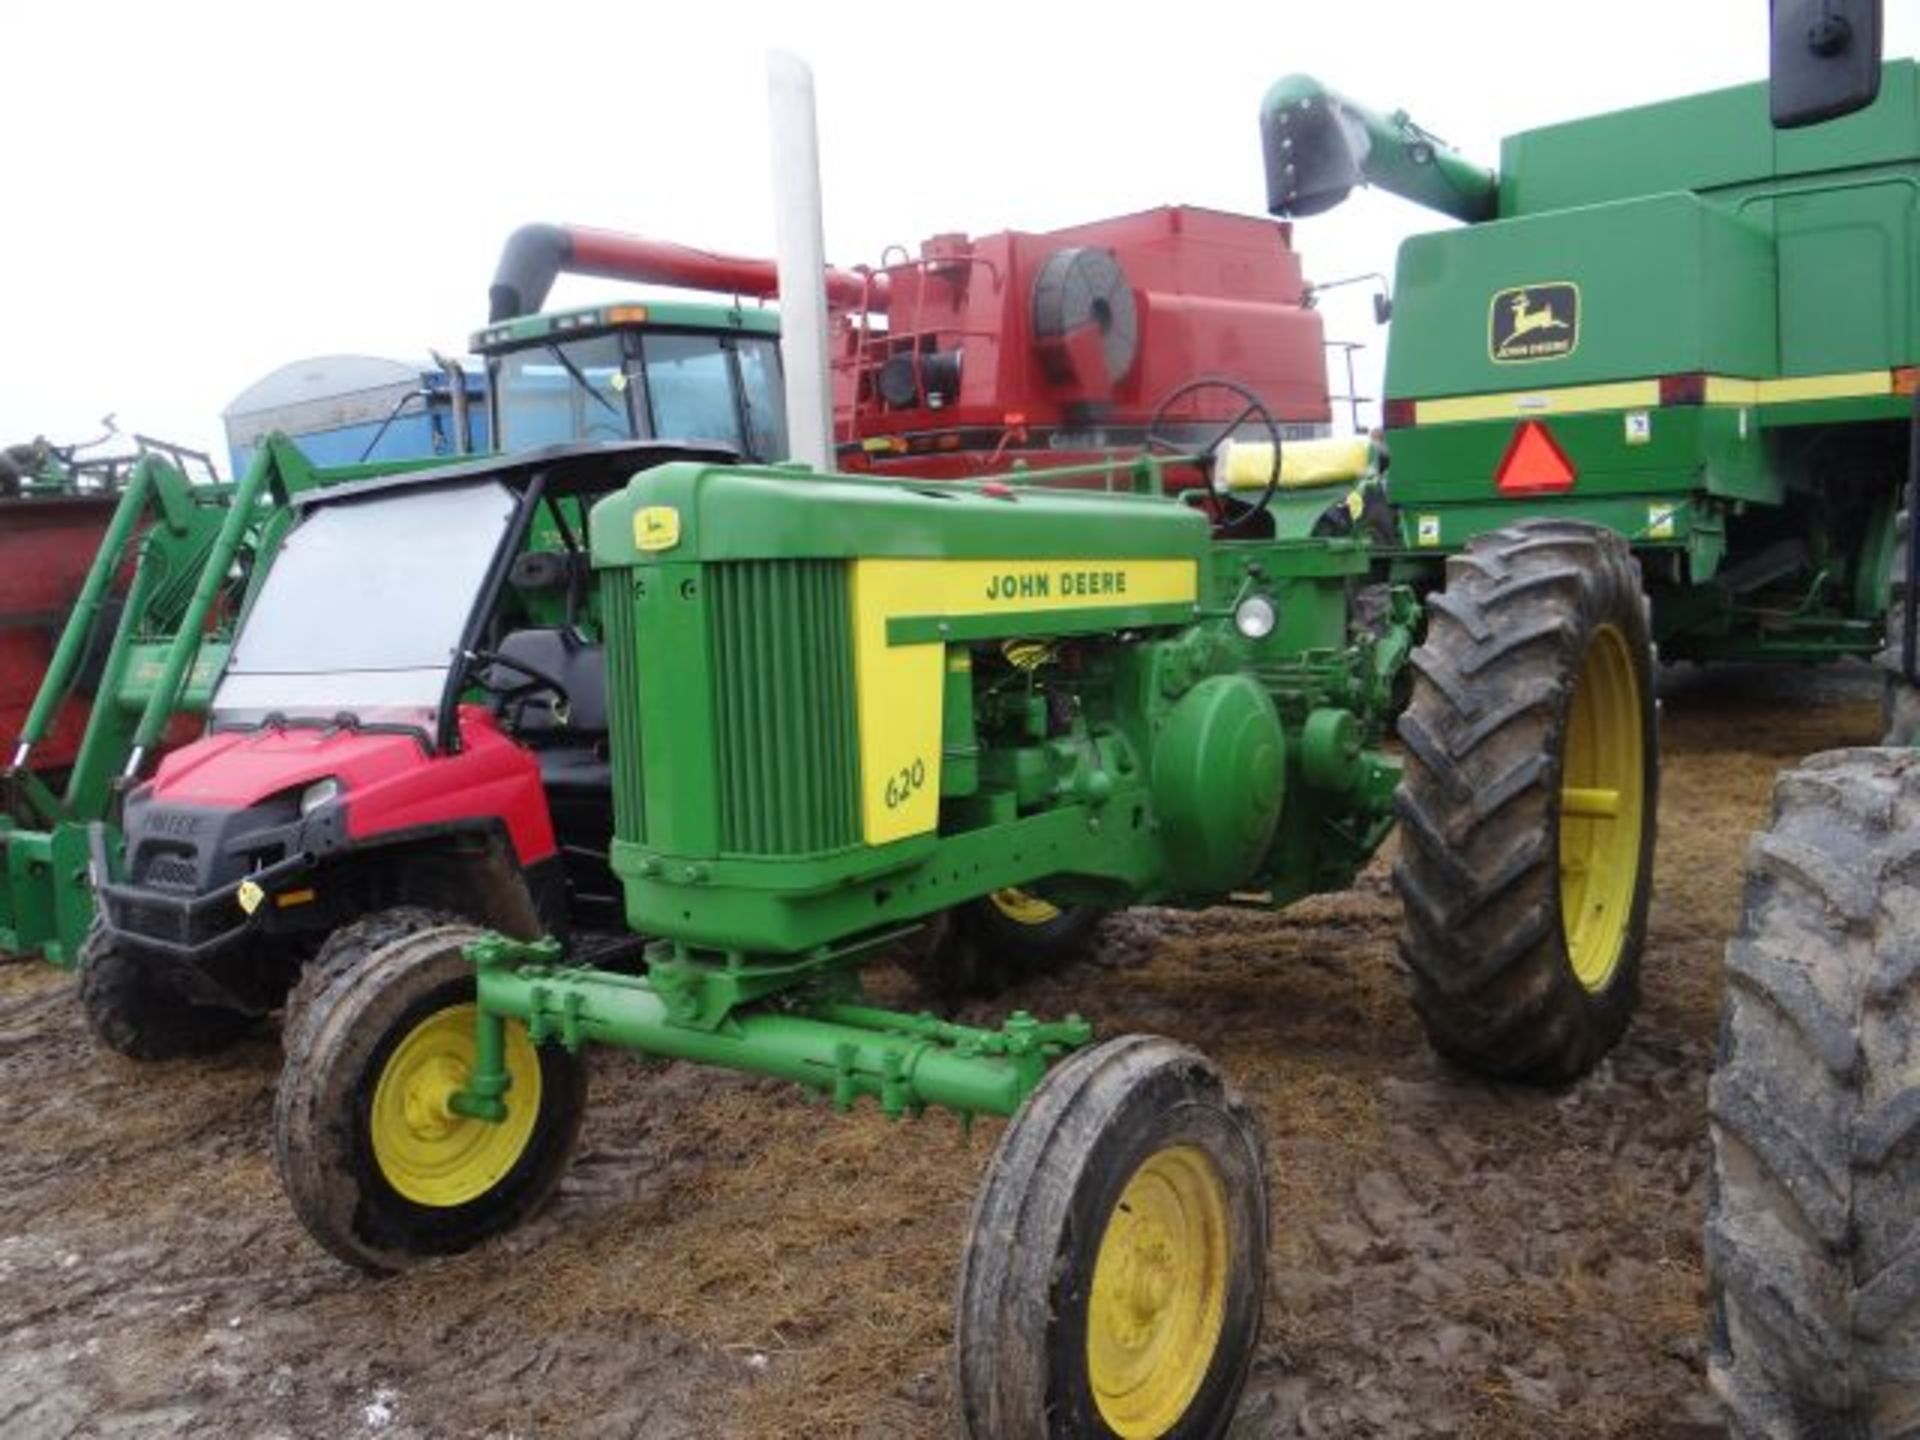 JD 620 Tractor WF, 3pt, Totally Rebuilt from Ground Up, New Seat in the Shed